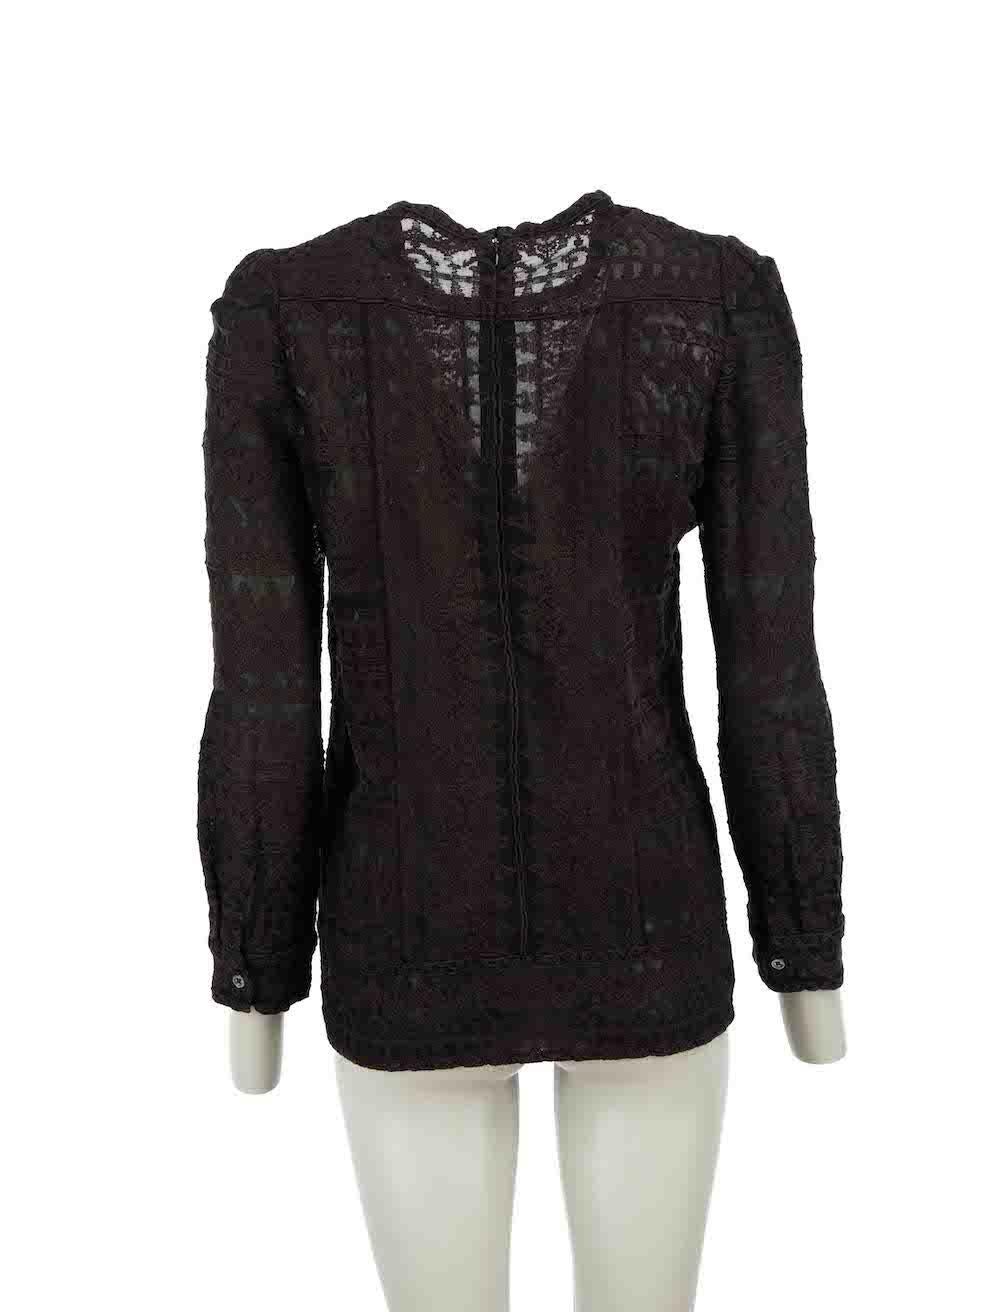 Isabel Marant Black Embroidered Sheer Top Size M In Excellent Condition For Sale In London, GB